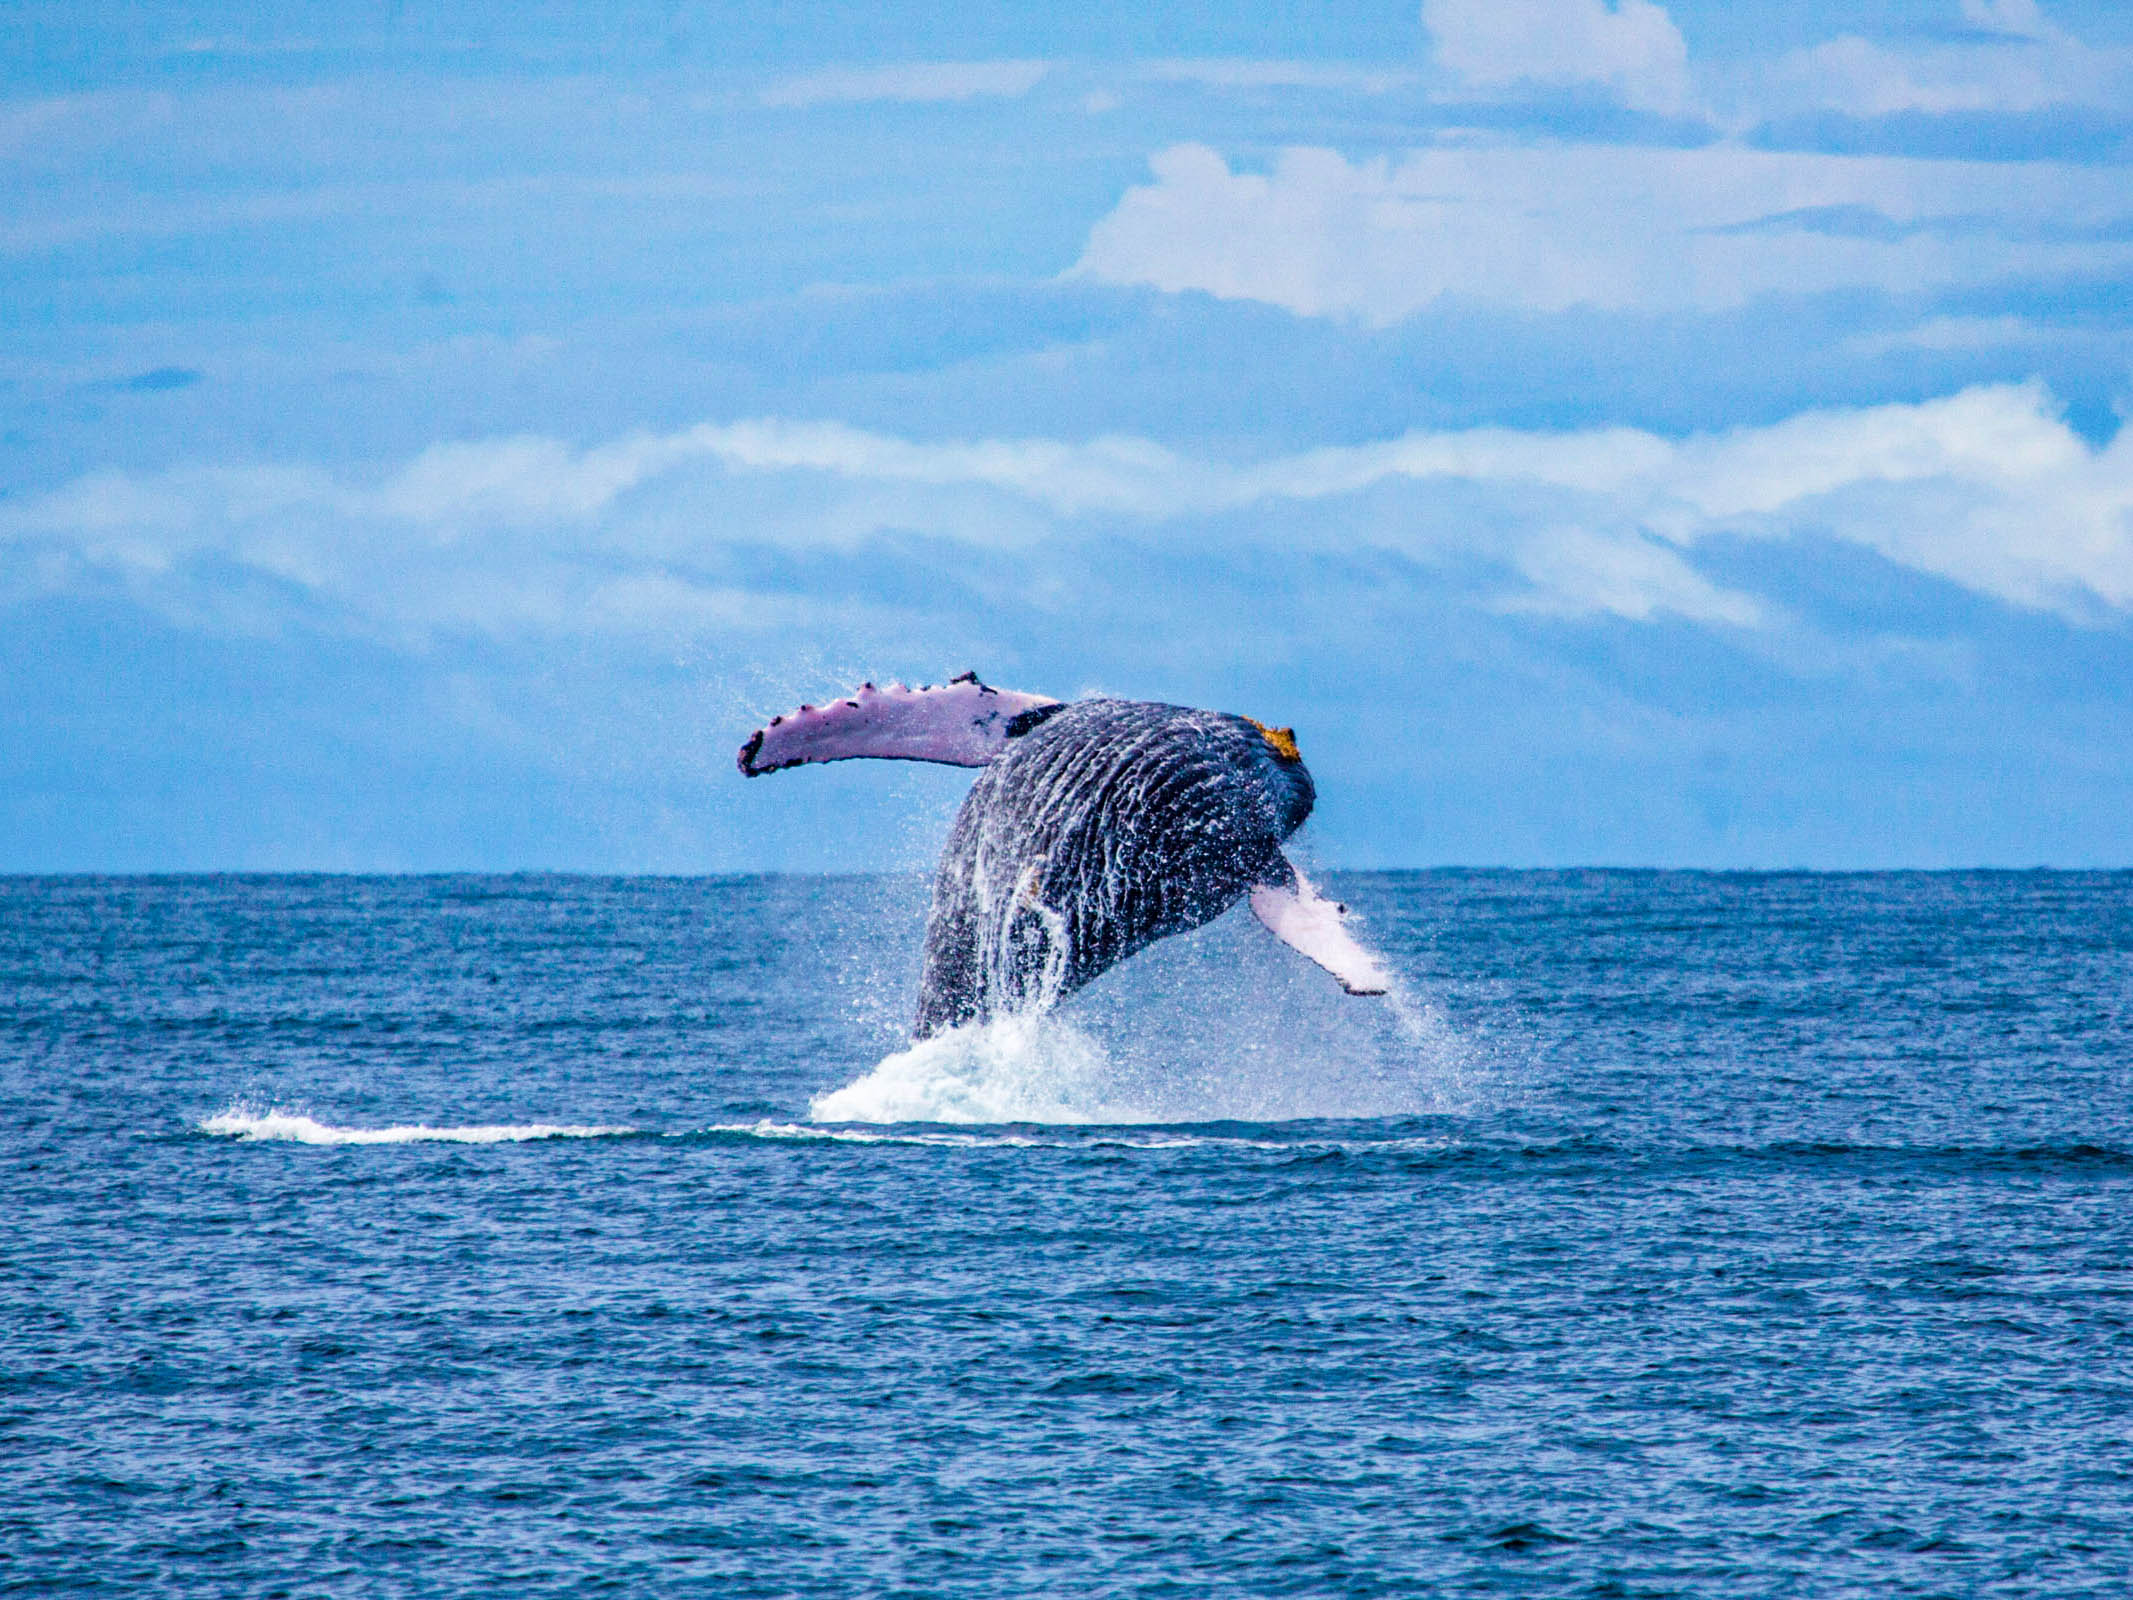 Whale watching in Golfito, Costa Rica